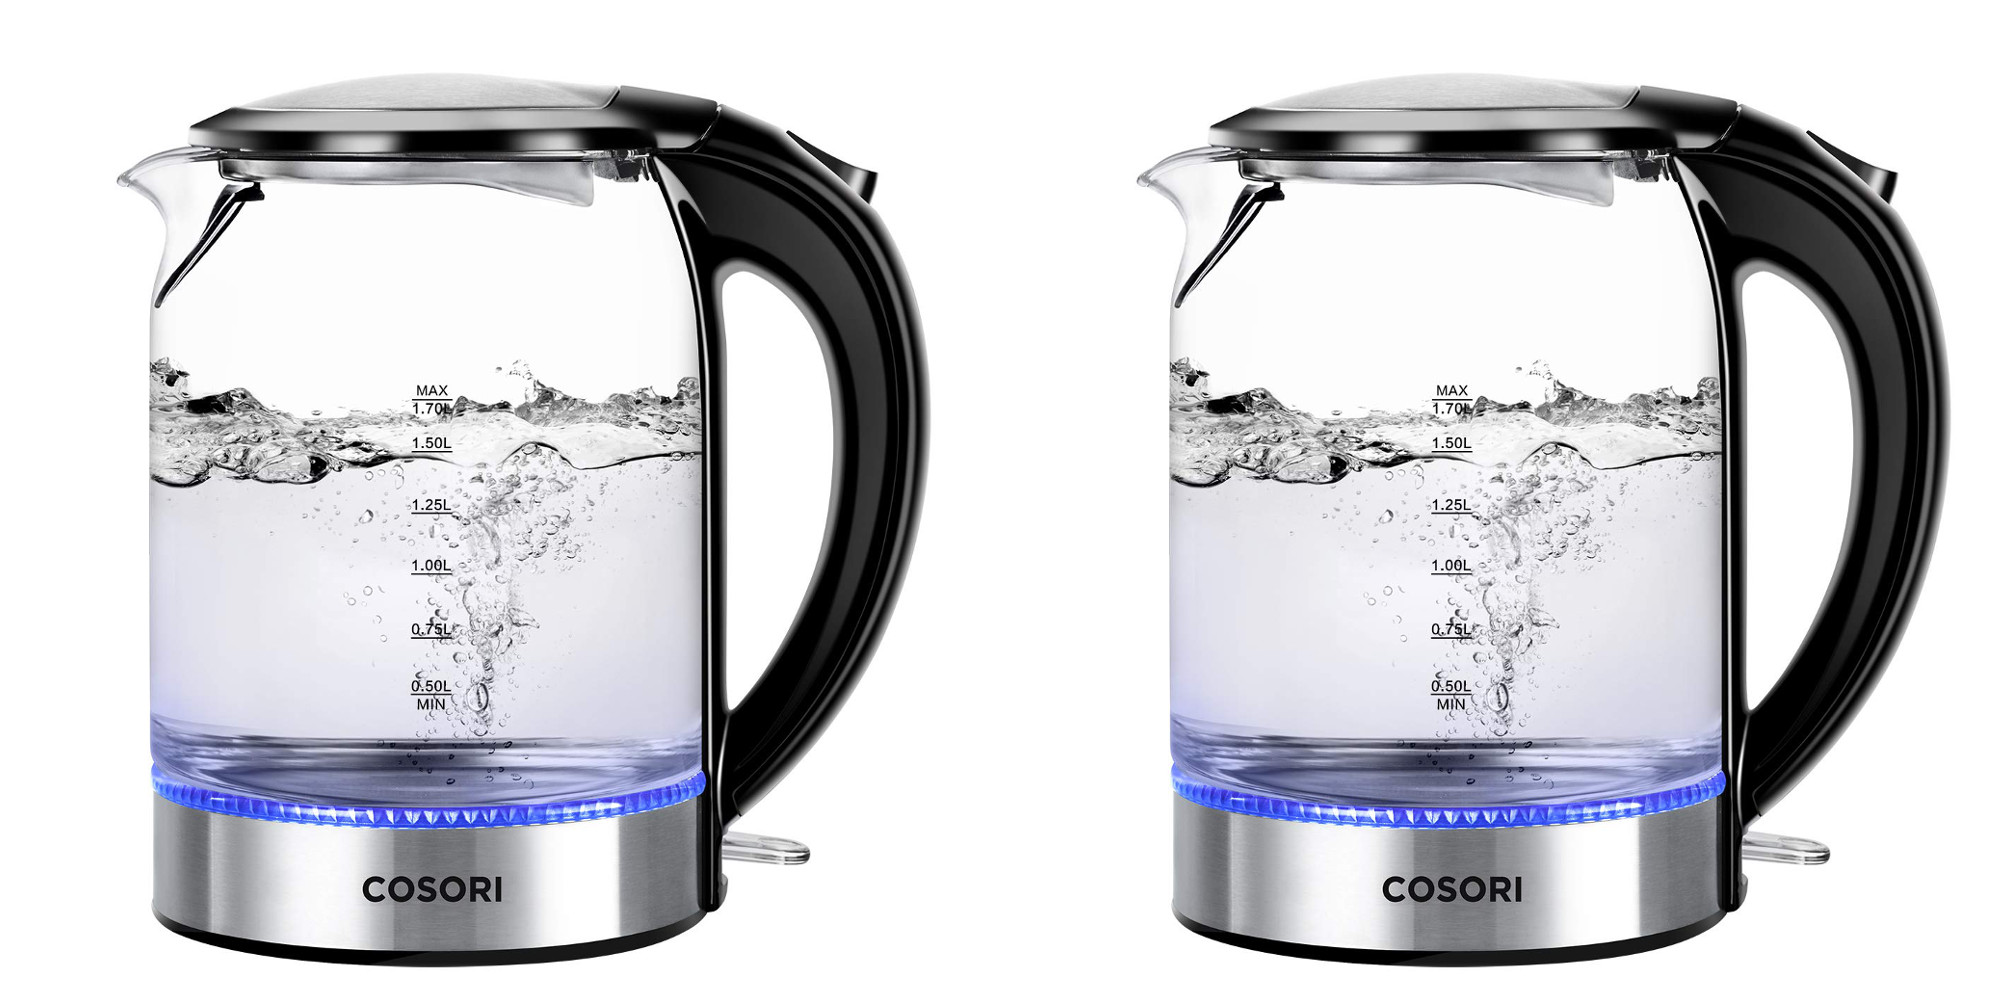 https://9to5toys.com/wp-content/uploads/sites/5/2019/07/COSORI-Electric-Kettle-LED-glass.jpg